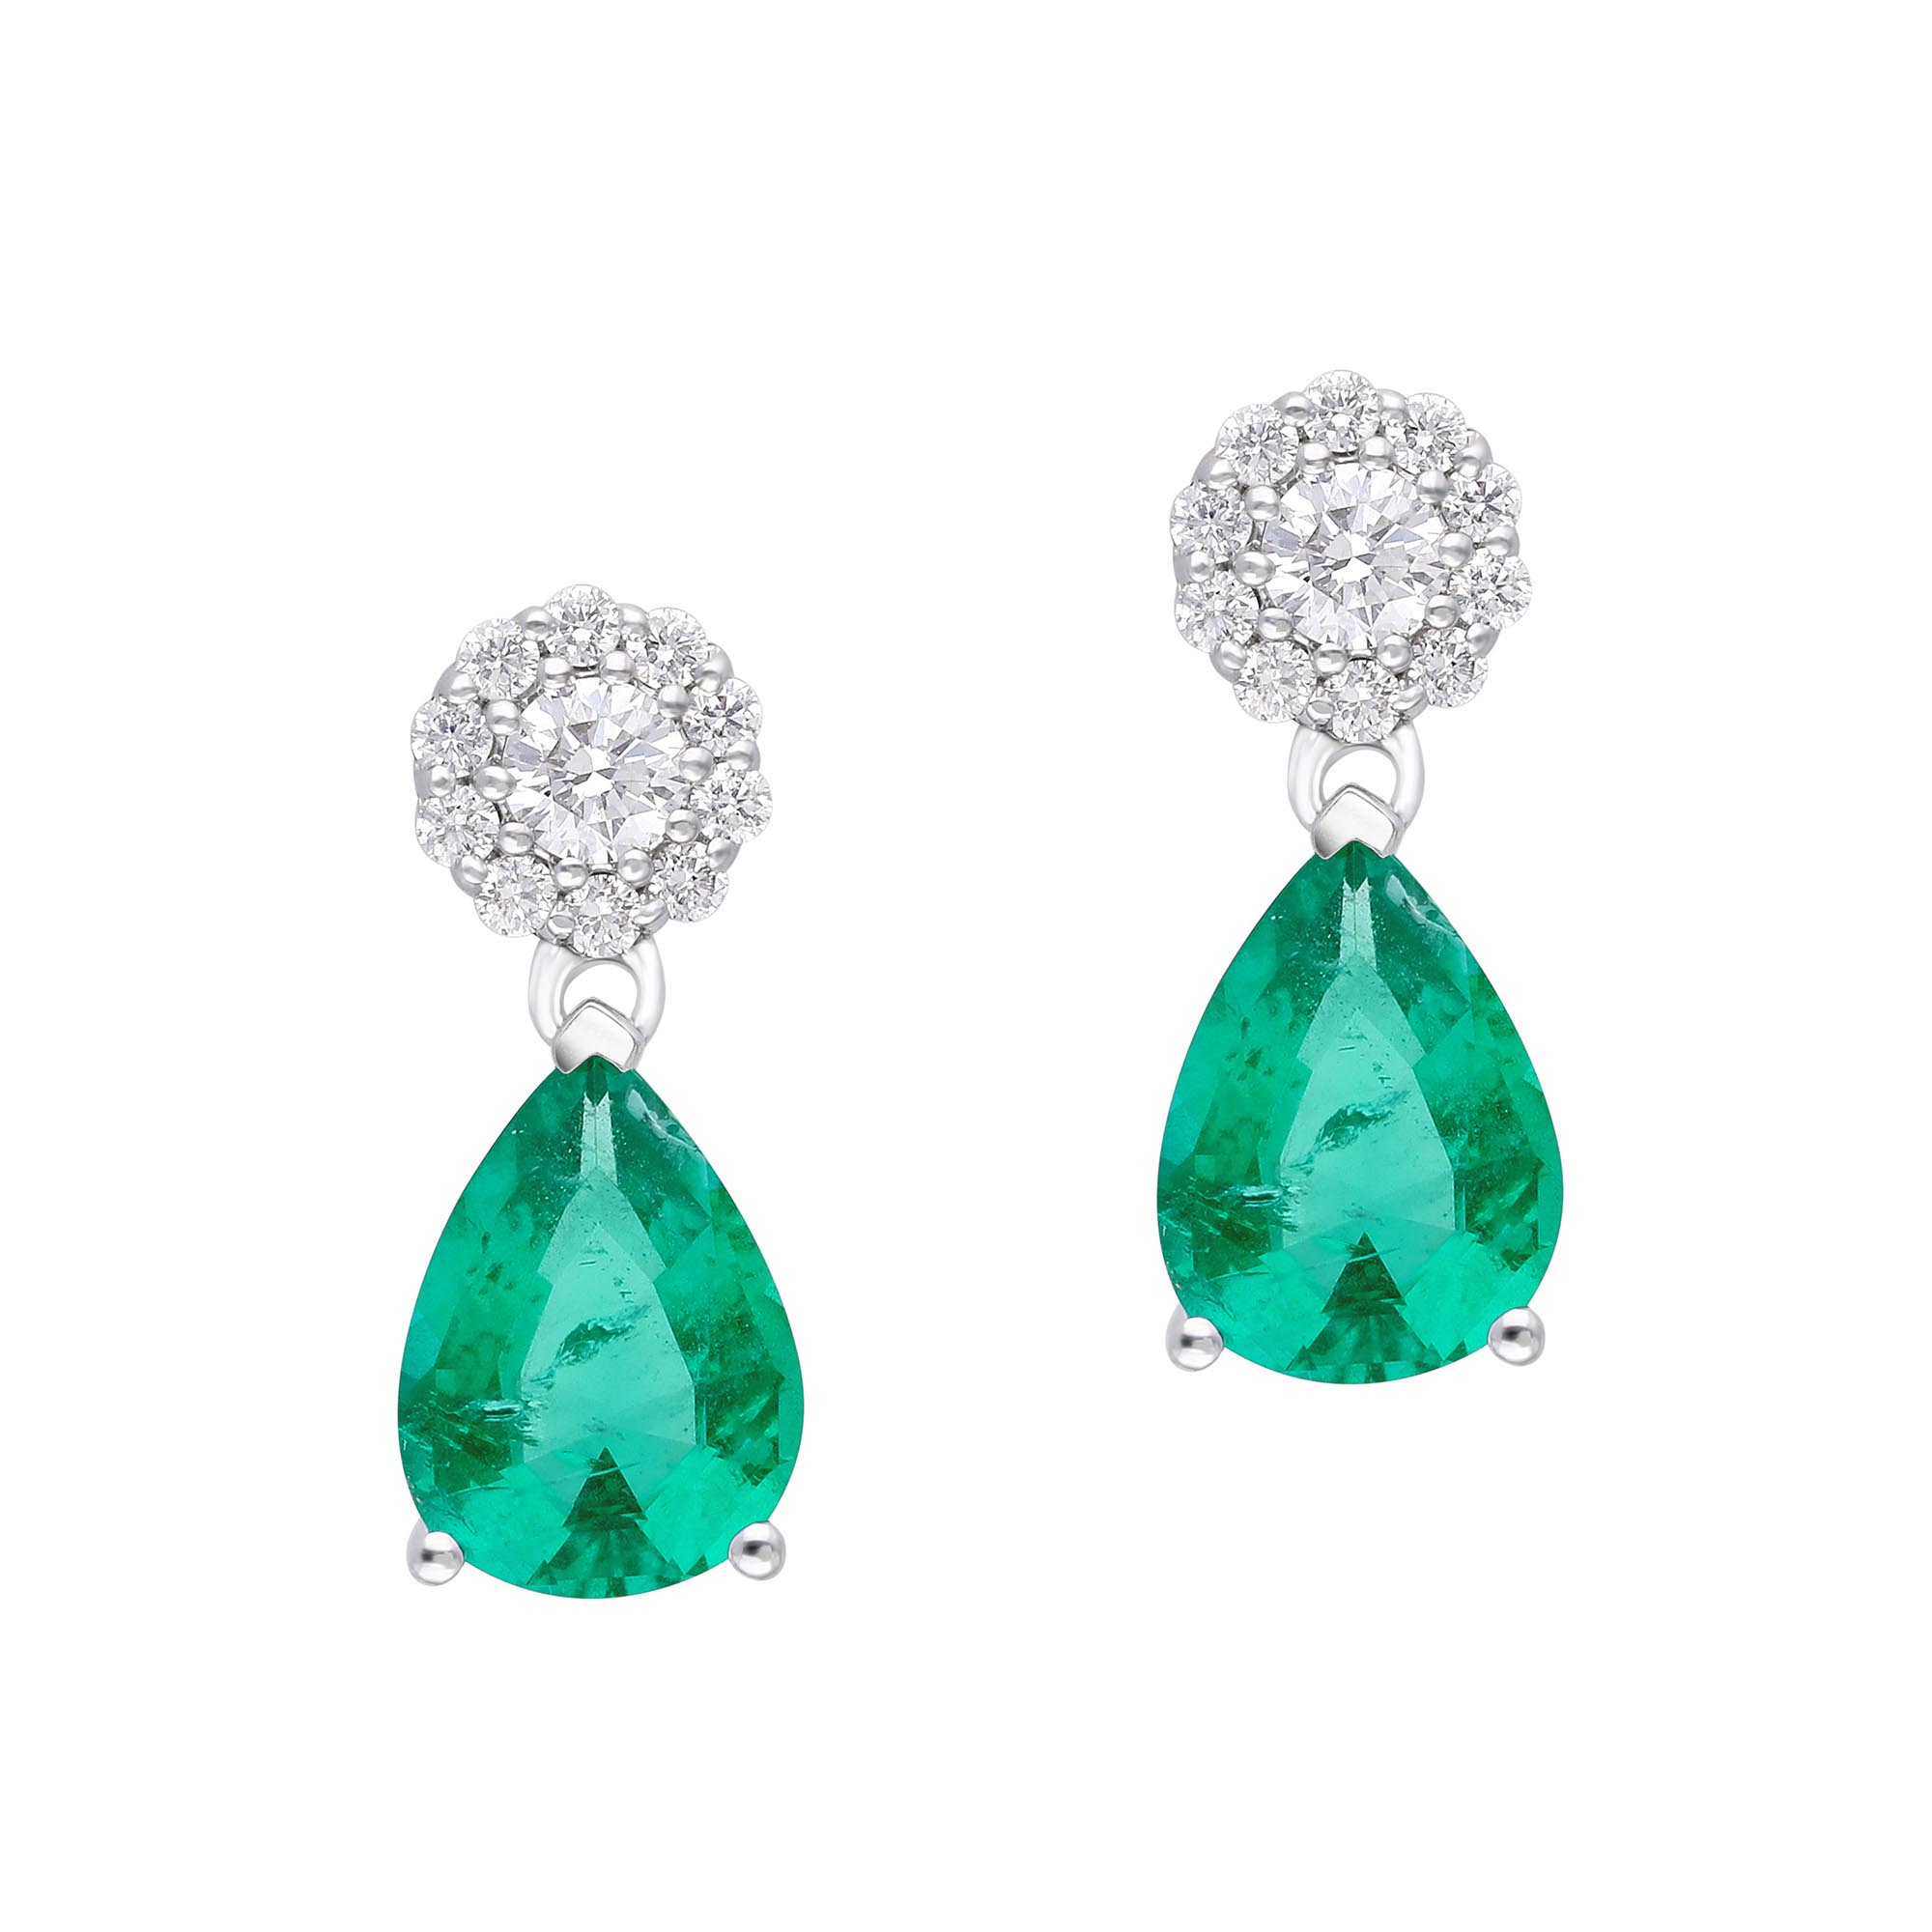 Fairtrade 9ct White Gold and Emerald Drop Hook Earrings